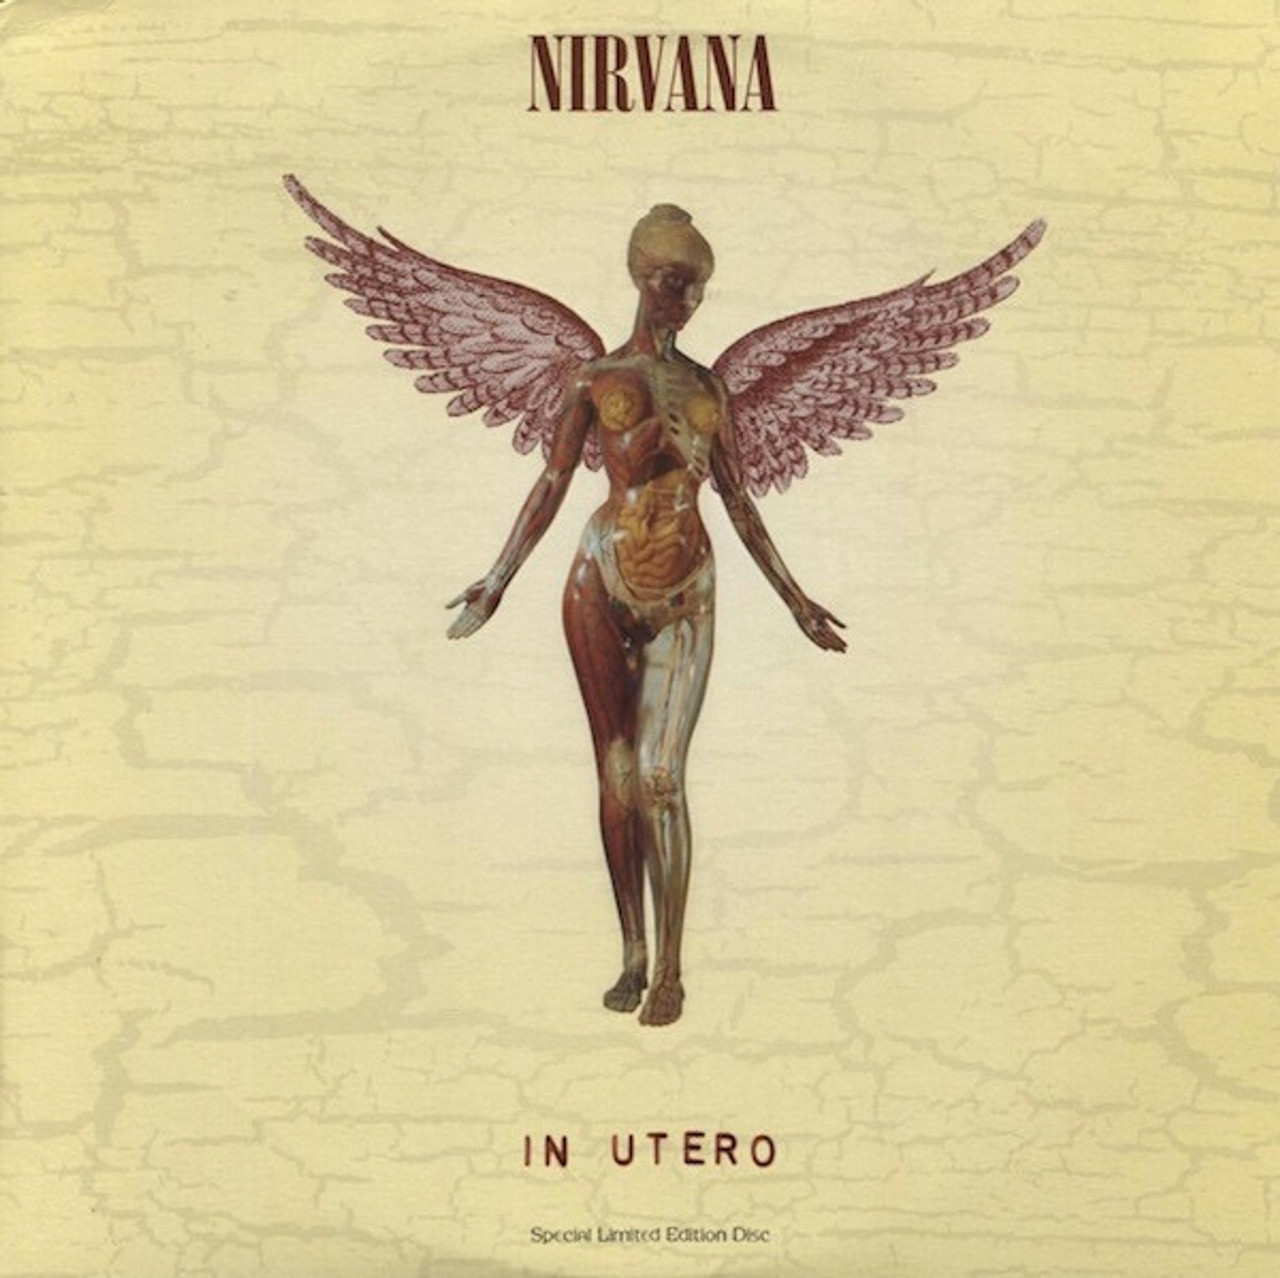 Nirvana - In Utero (1993 Special Limited Edition Disc on Clear